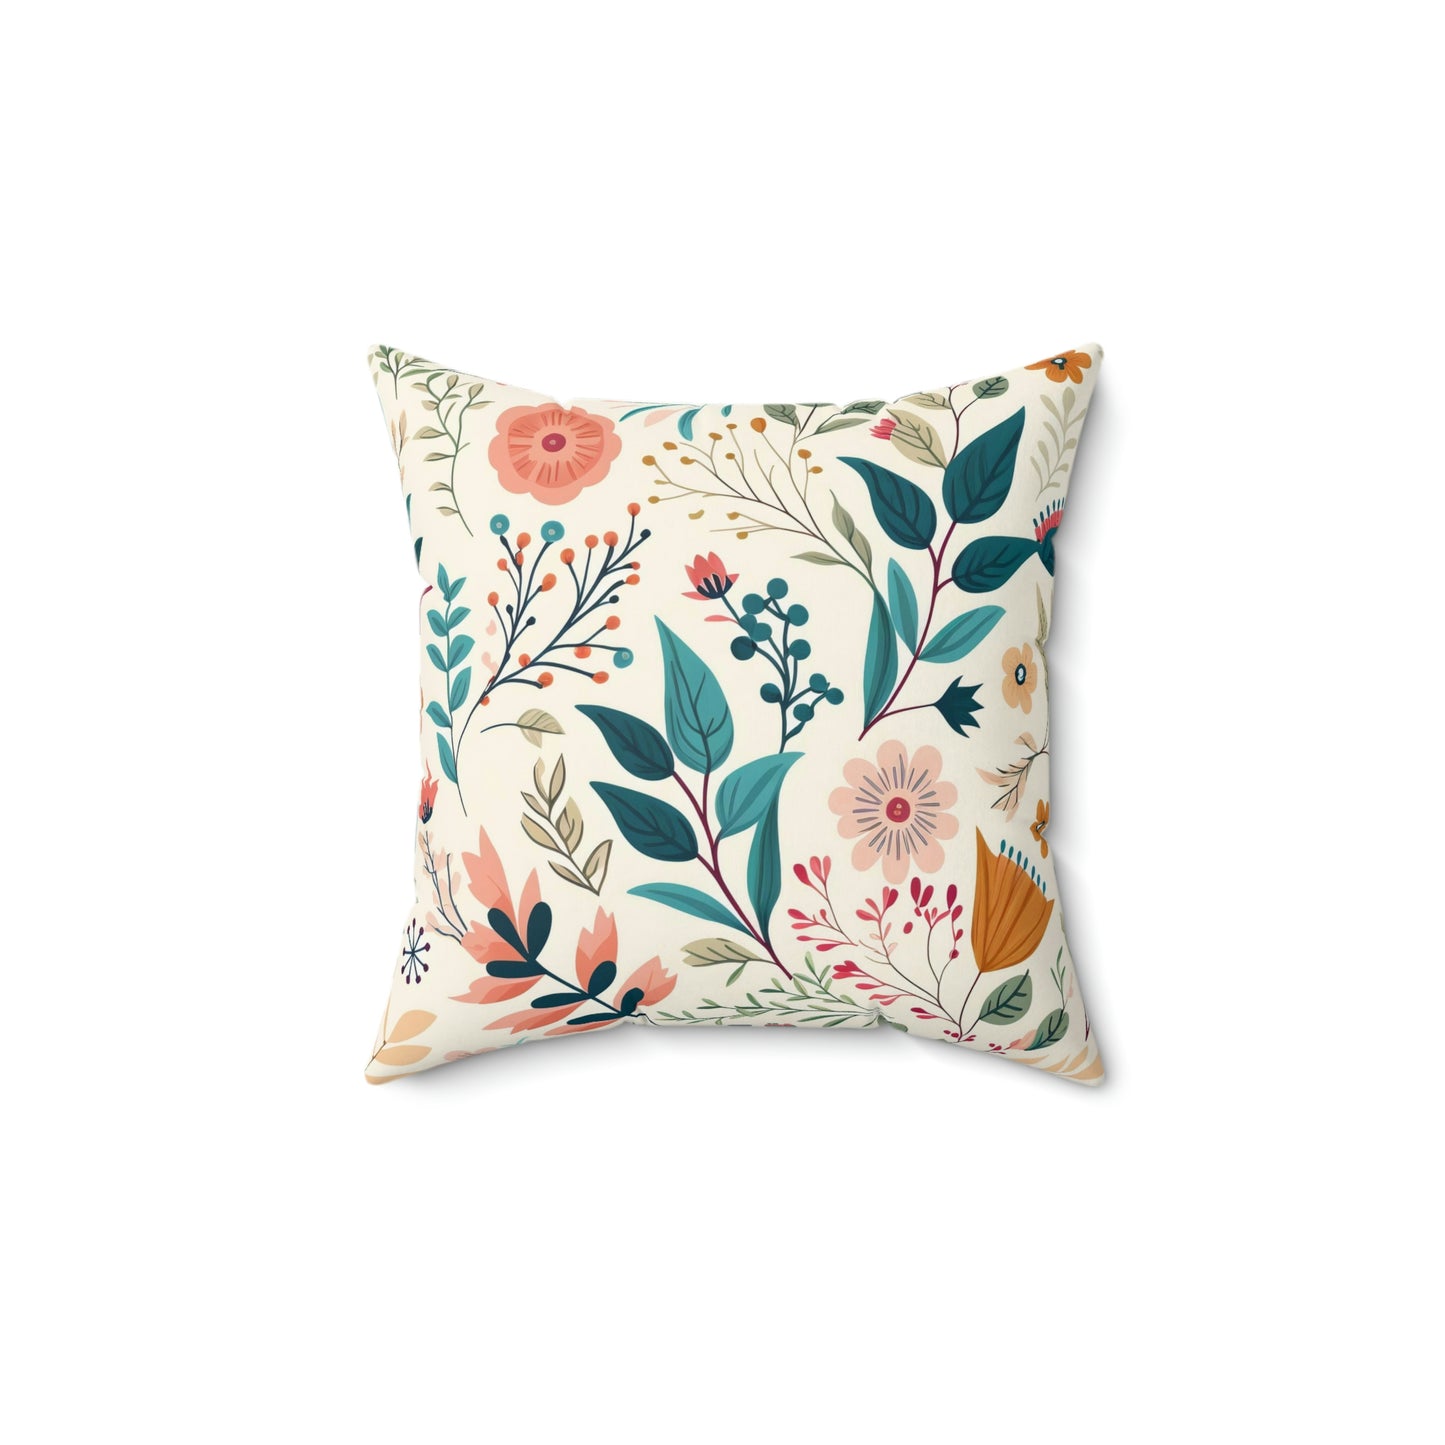 floral accent throw pillow on a couch, botanical couch pillow on a chair, floral pattern pillow on a lounger, spring garden floral decorative pillow on a bedPink and blue floral accent throw pillow on a couch, pink and blue botanical couch pillow on a chair, pink and blue floral pattern pillow on a lounger, pink and blue spring garden floral decorative pillow on a bed